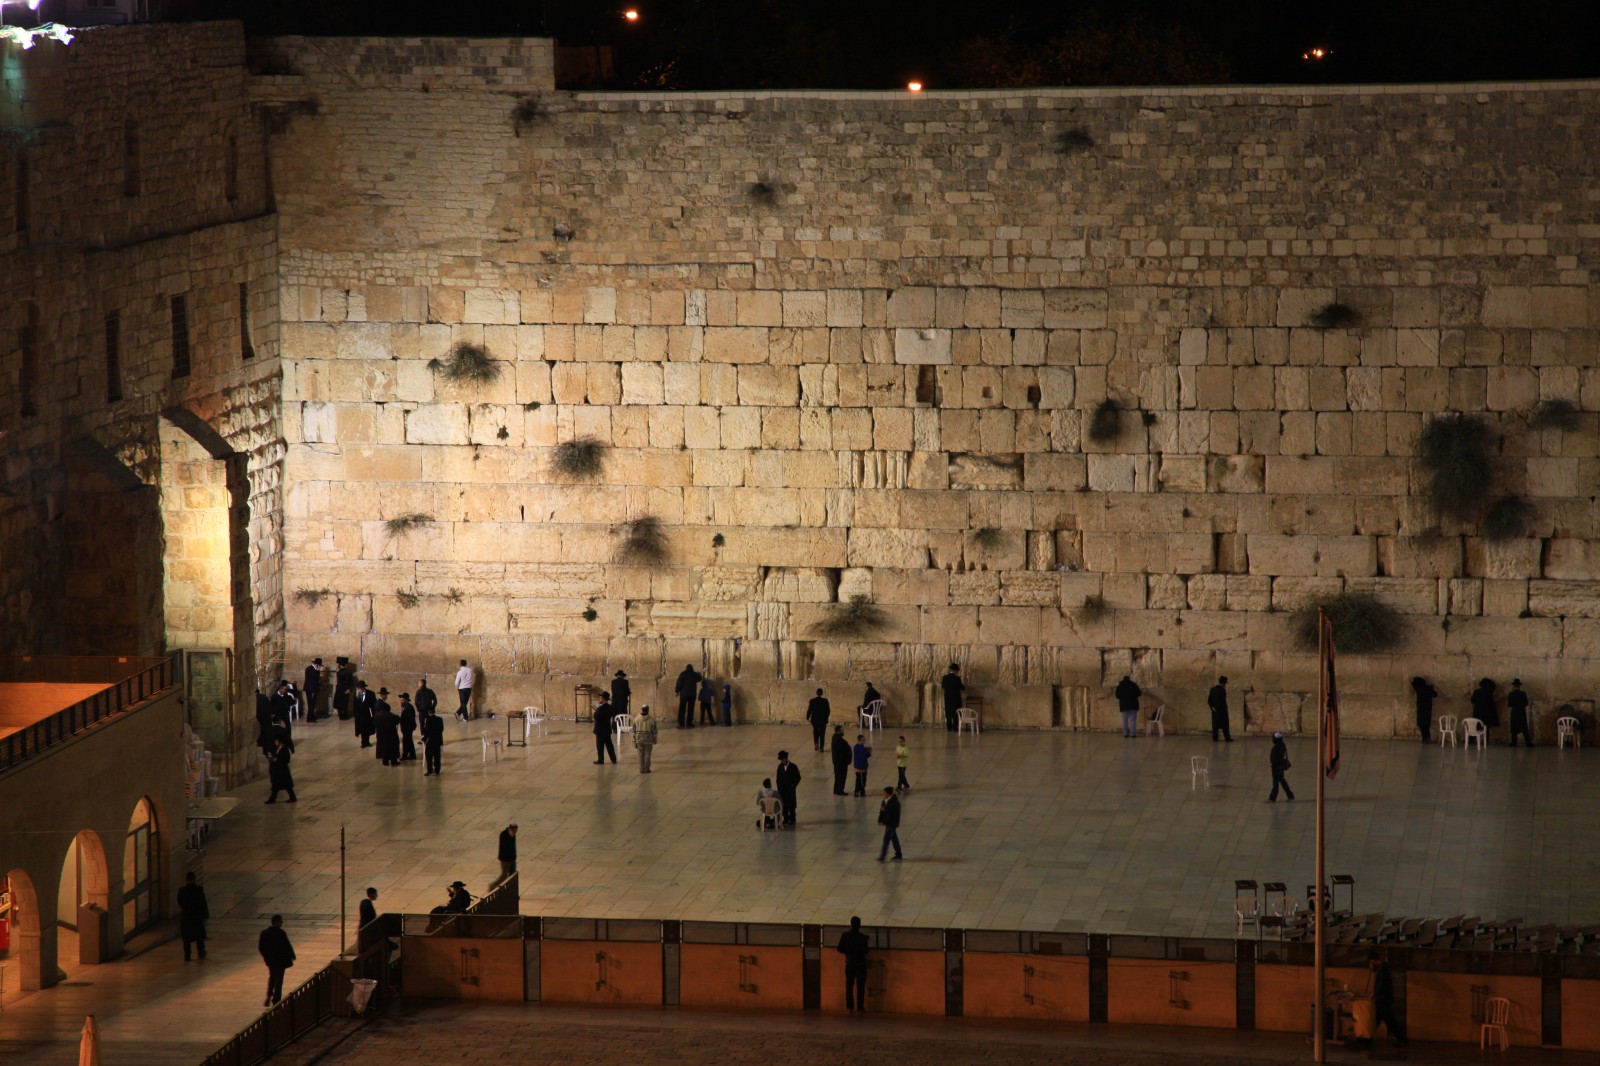 You never get bored watching Jews rocking next to the wall